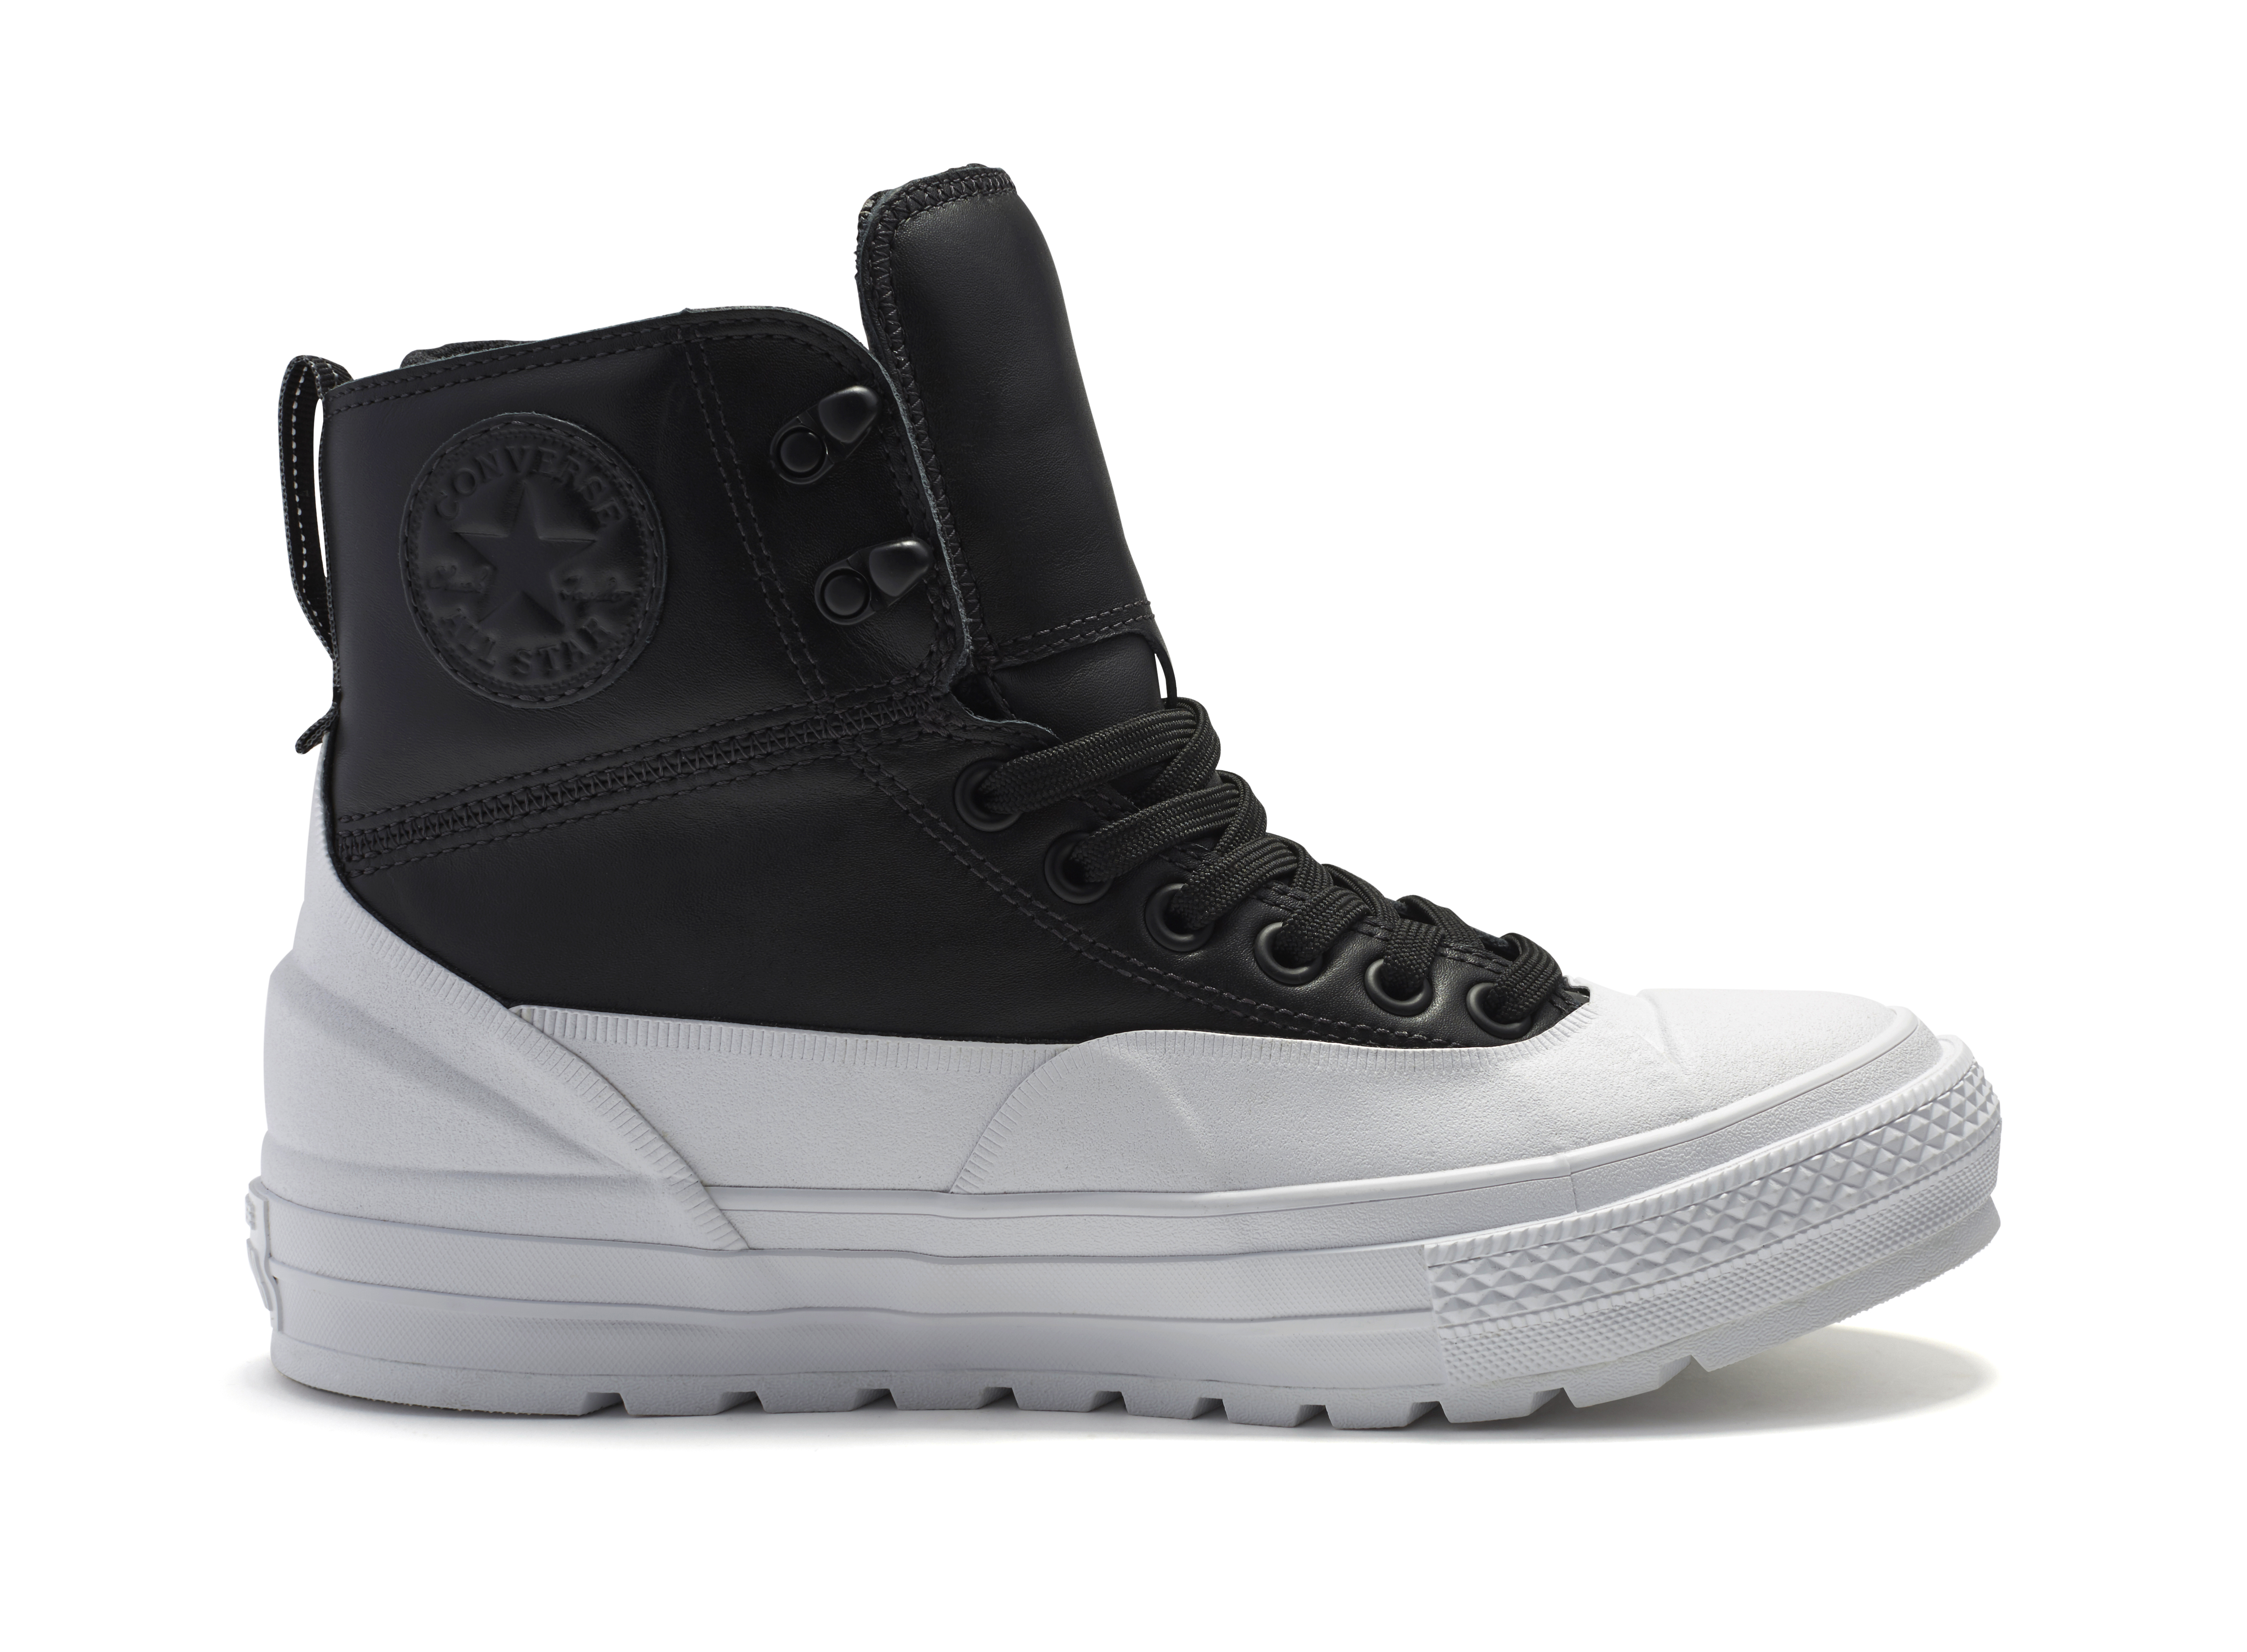 converse sneaker boot collection